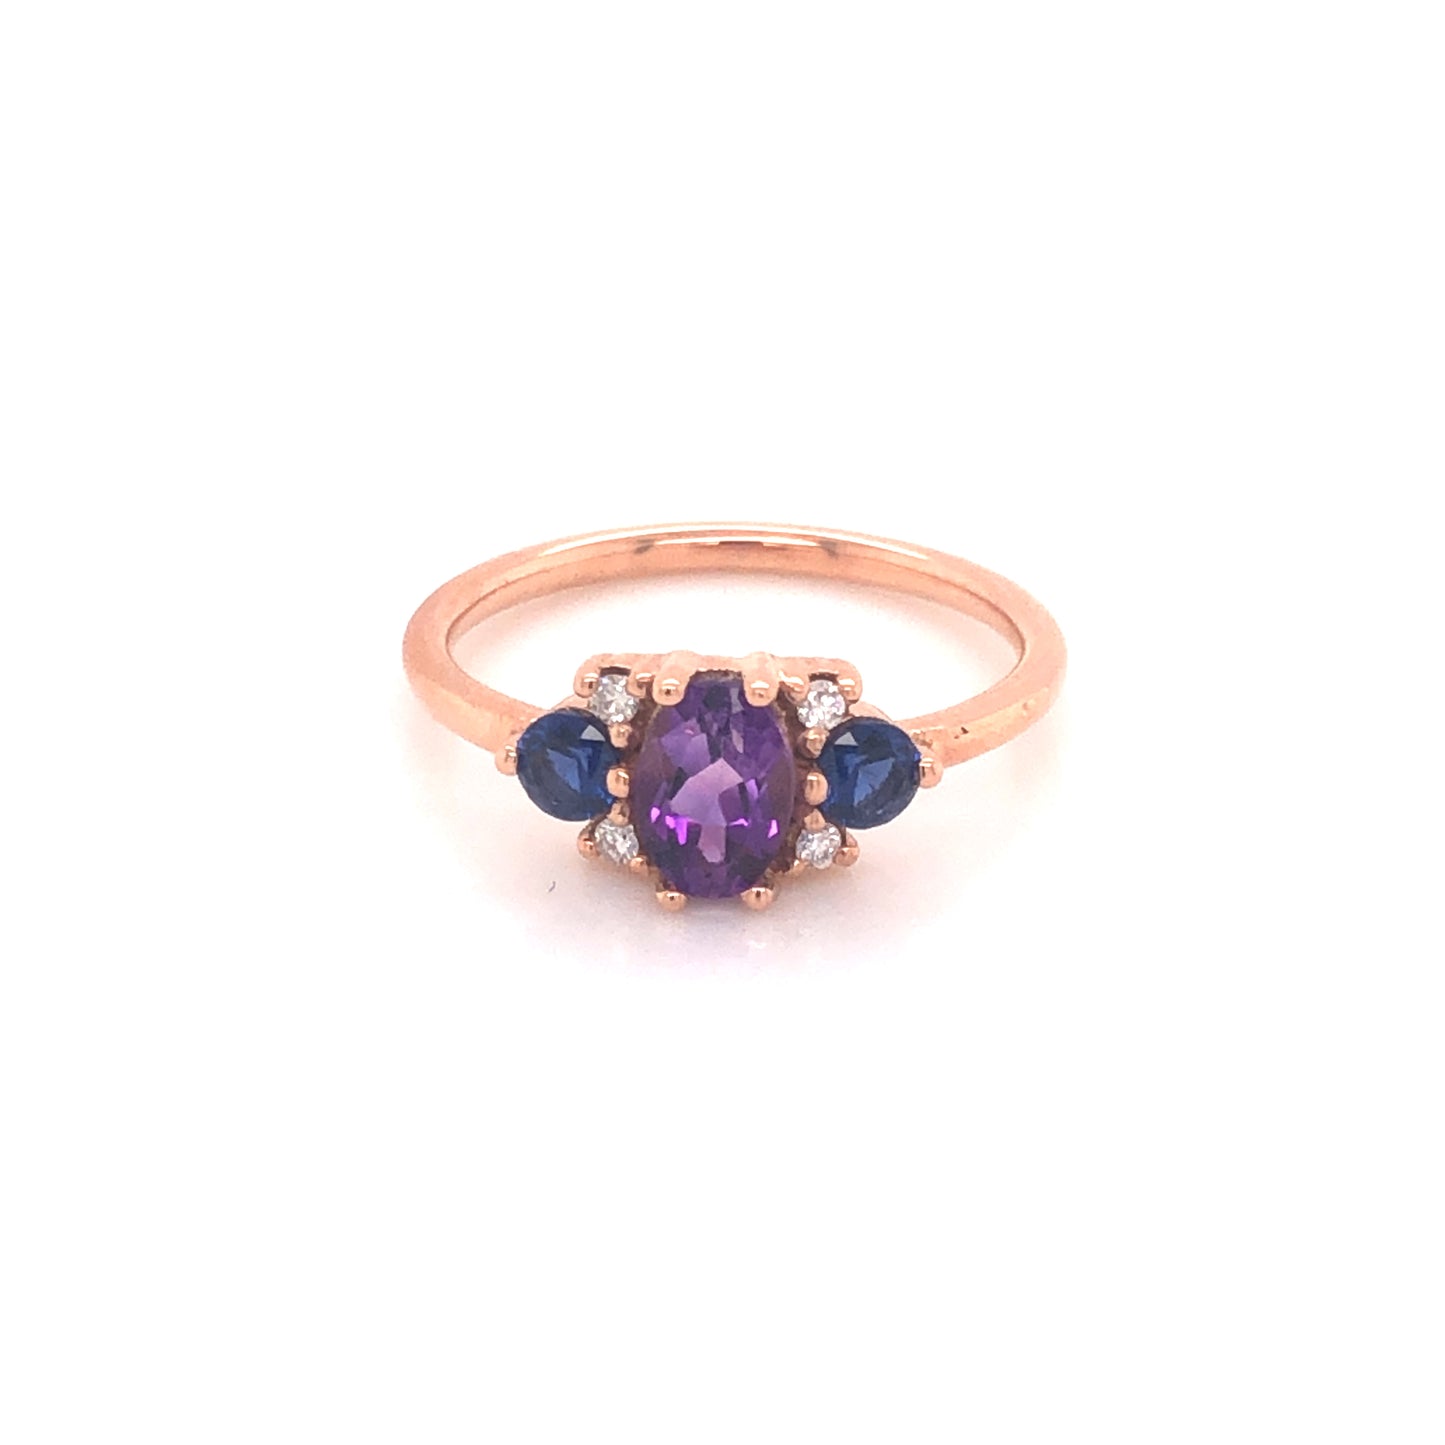 IMMEDIATE DELIVERY / UNIQUE PIECE / Amethyst Ring with Diamonds and Sapphires / 14k Rose Gold / Size 5.25